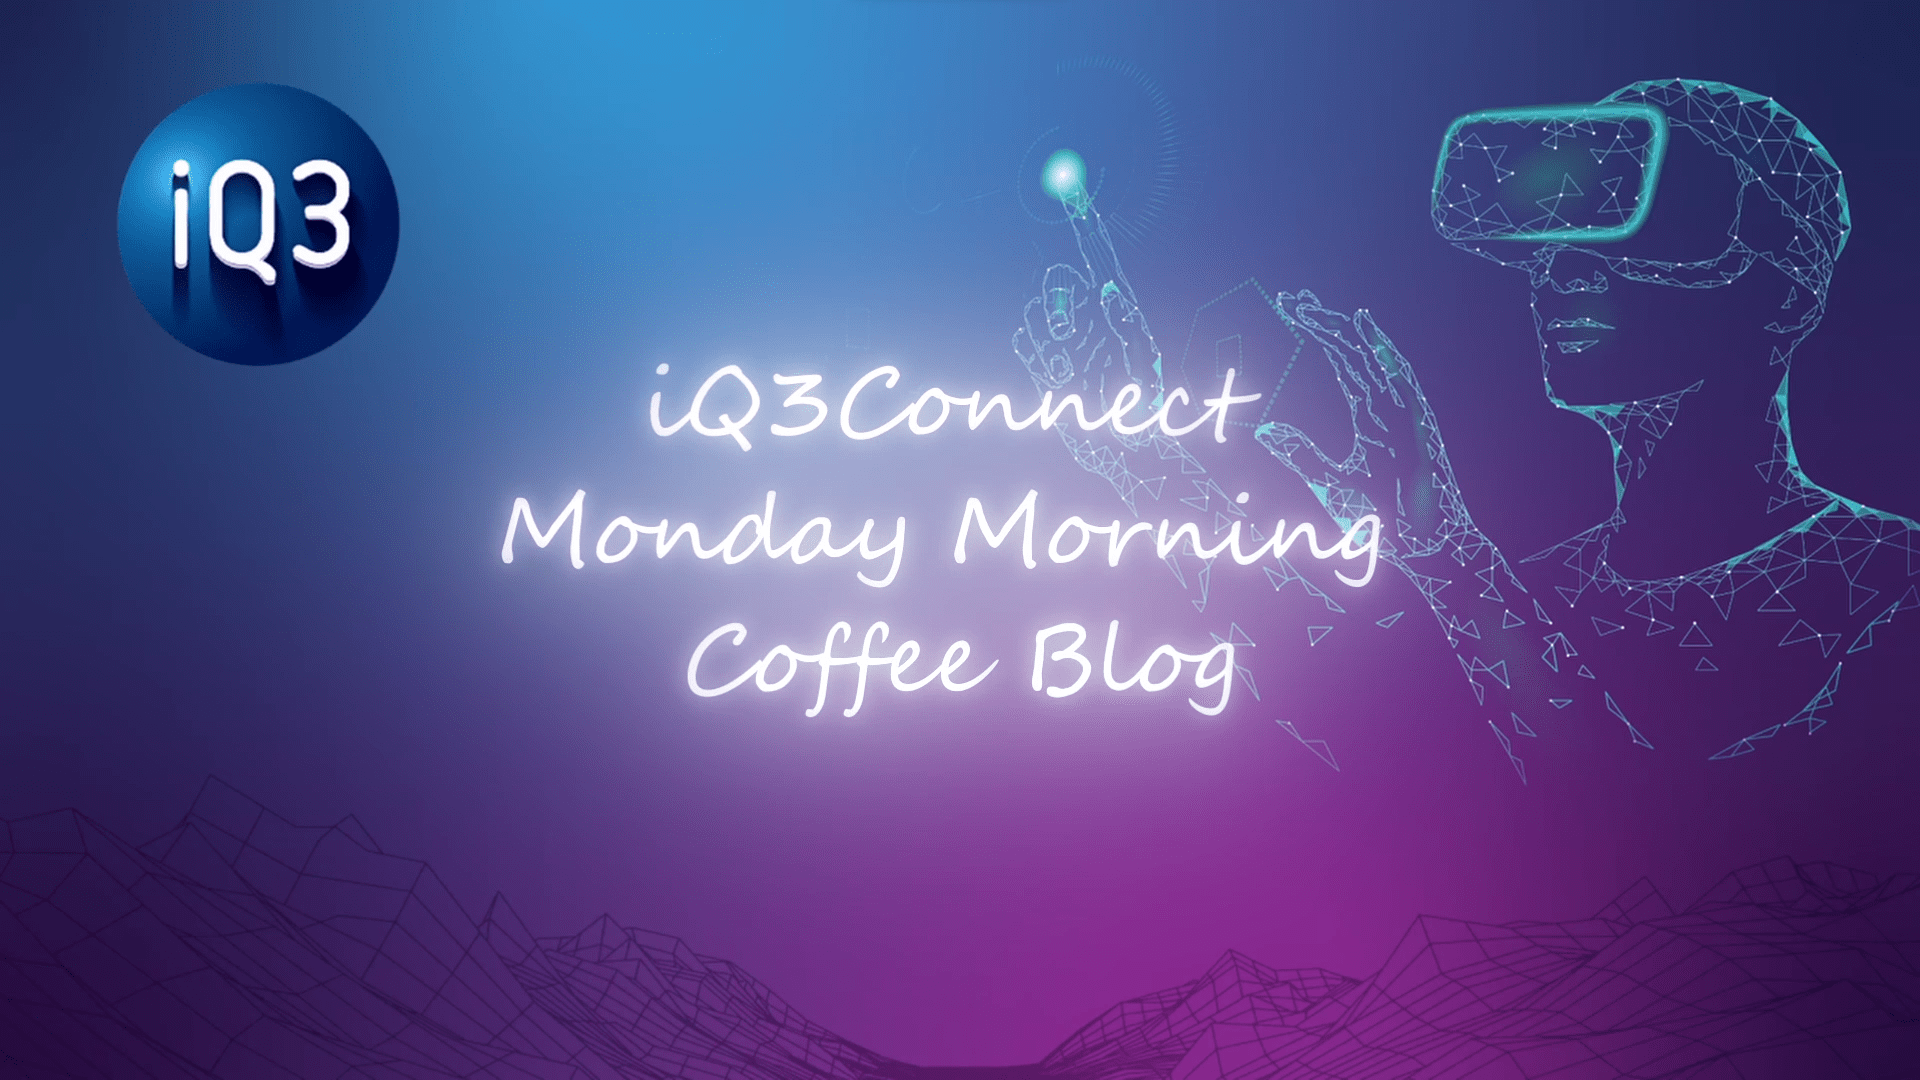 Monday Morning Coffee Blog - Applicable XR Content